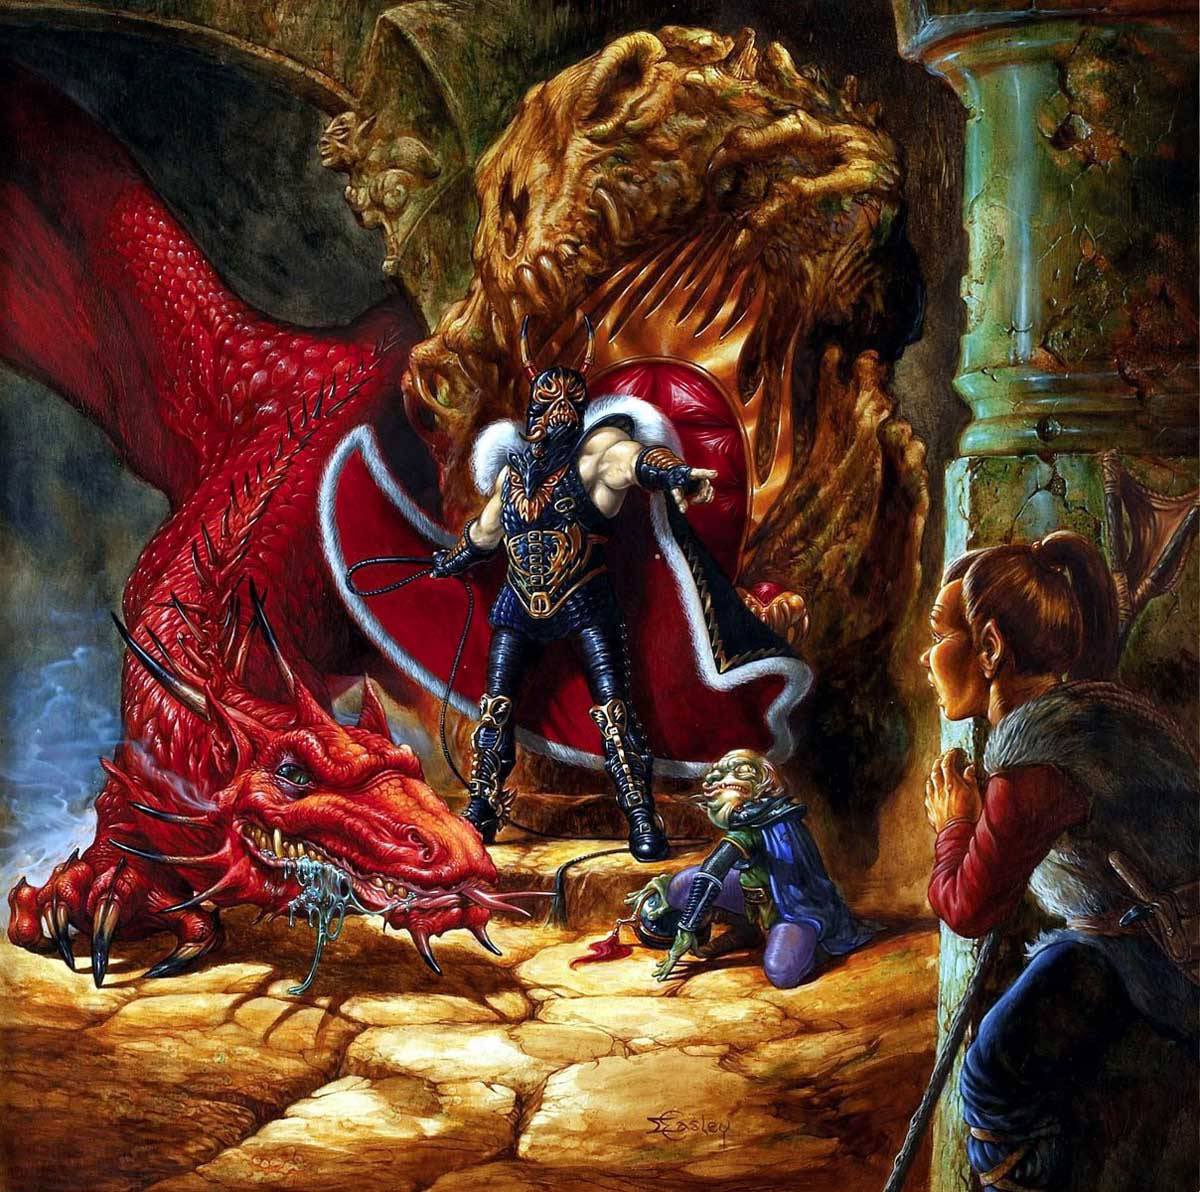 Also, Verminaard’s helm is red…more like this.

#Dragonlance 
🖼️ Jeff Easley